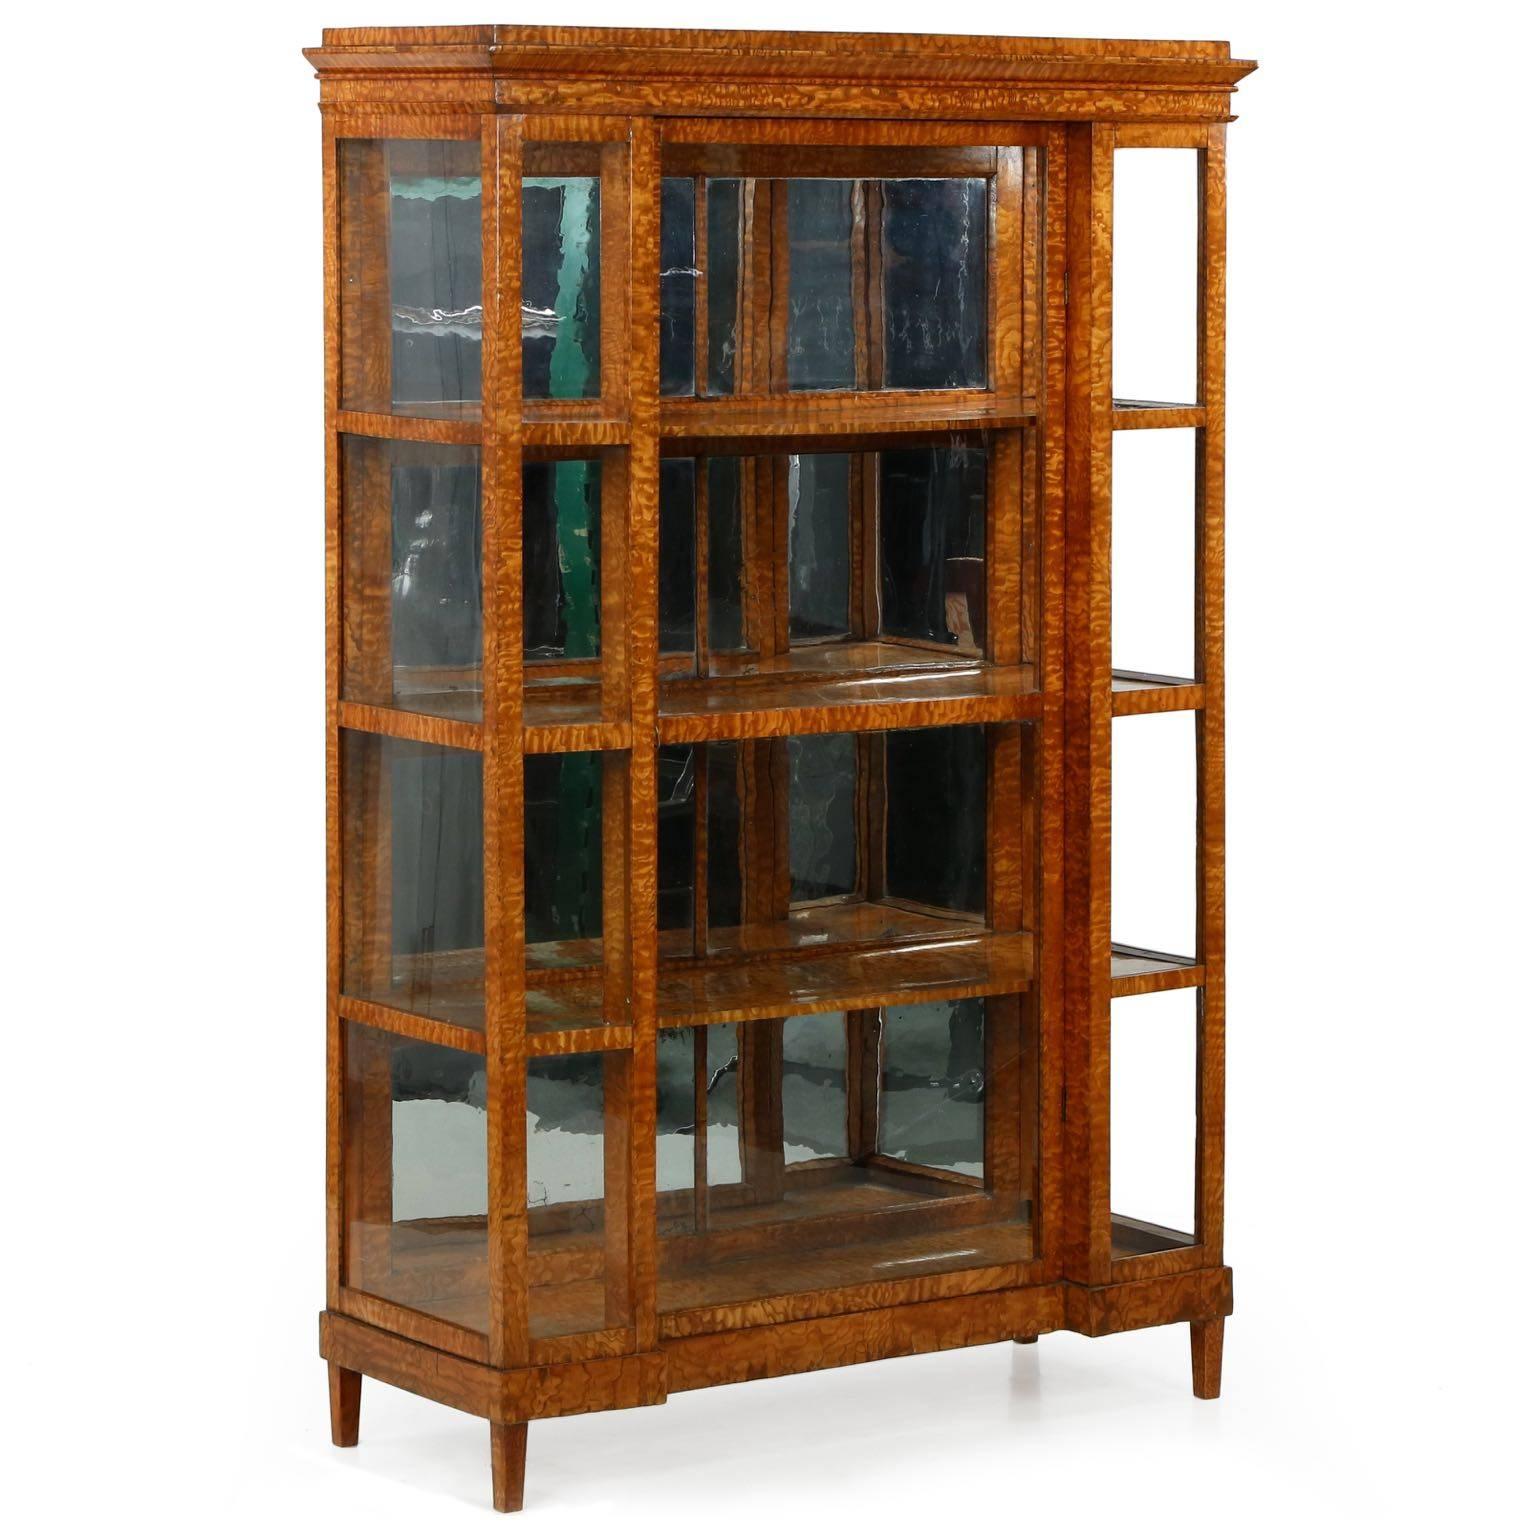 One of the most visually intriguing cabinets we’ve carried in quite some time, this very fine Biedermeier vitrine is a testament to the incredible effect a chaotic grain can have in defining a design. A work that is austere in every sense, a squared